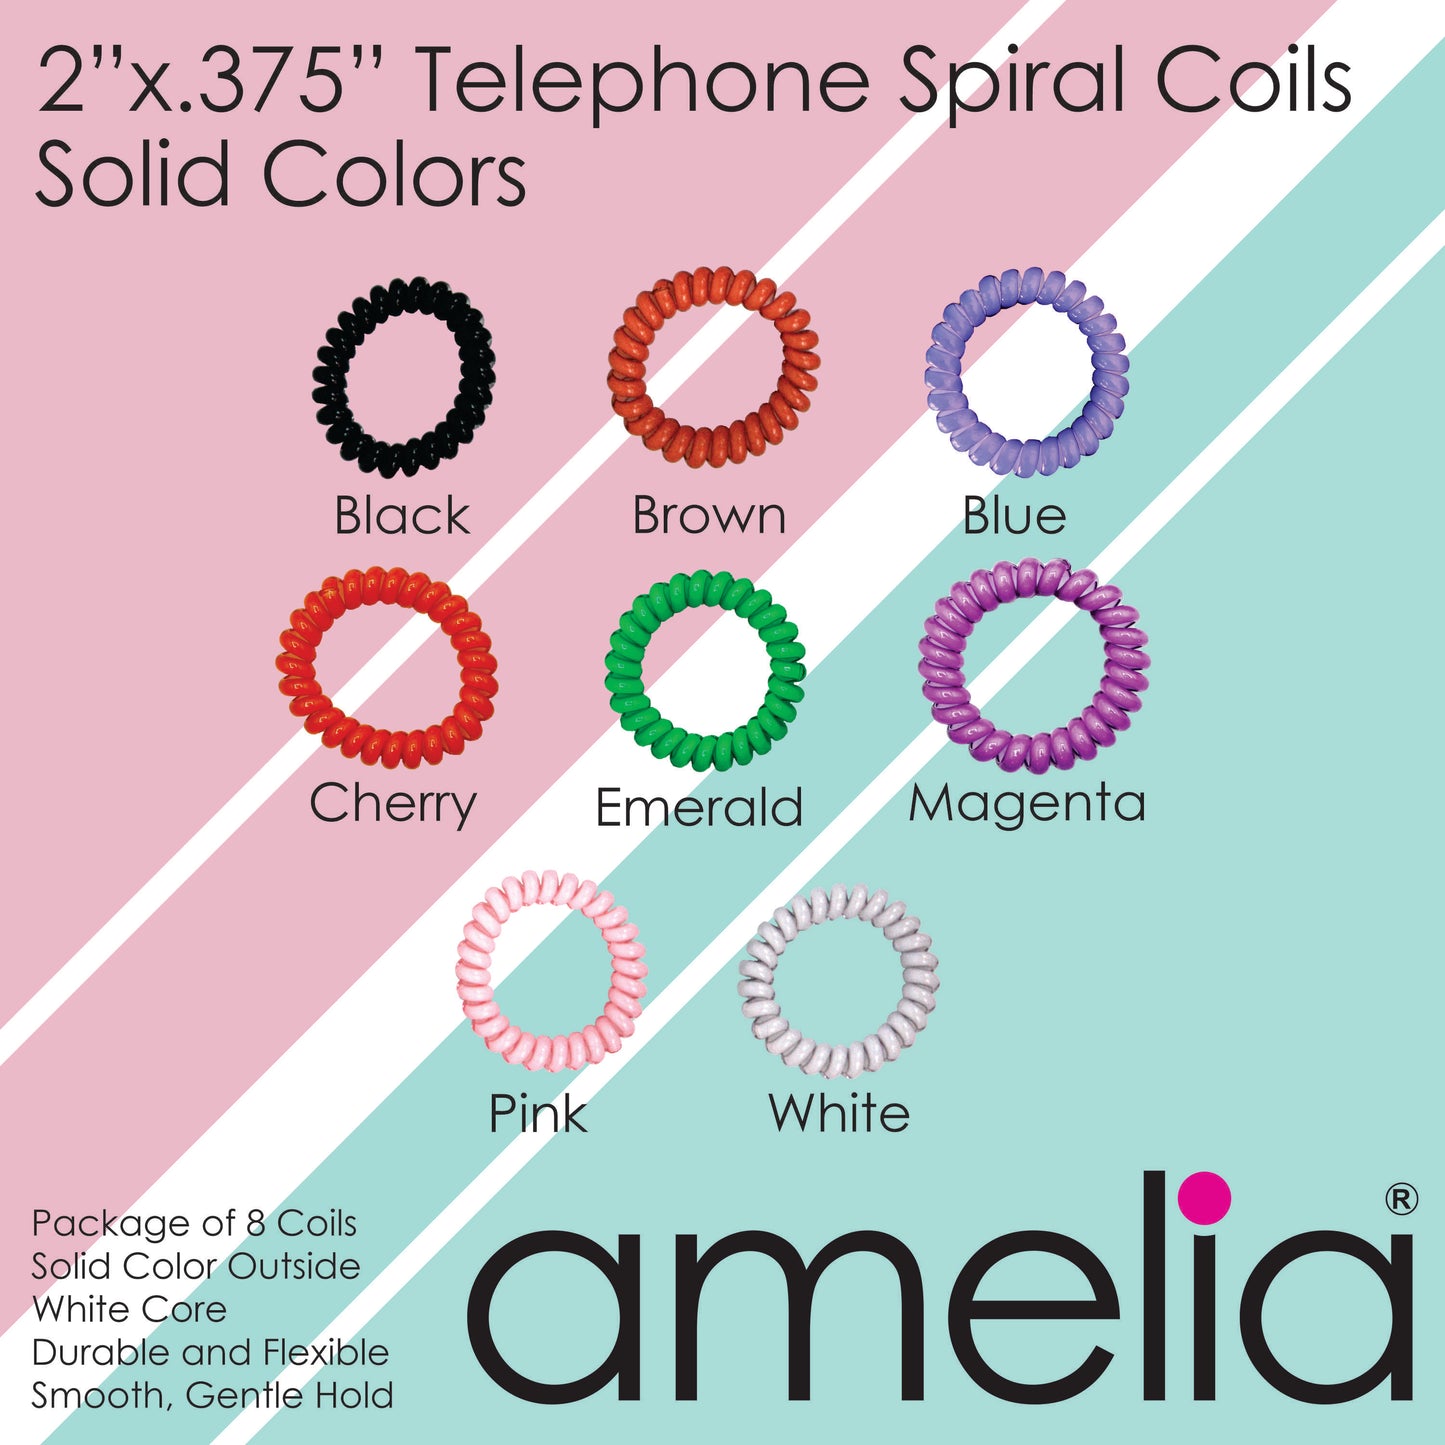 Amelia Beauty Products 8 Medium Elastic Hair Coils, 2.0in Diameter Thick Spiral Hair Ties, Gentle on Hair, Strong Hold and Minimizes Dents and Creases, Brown